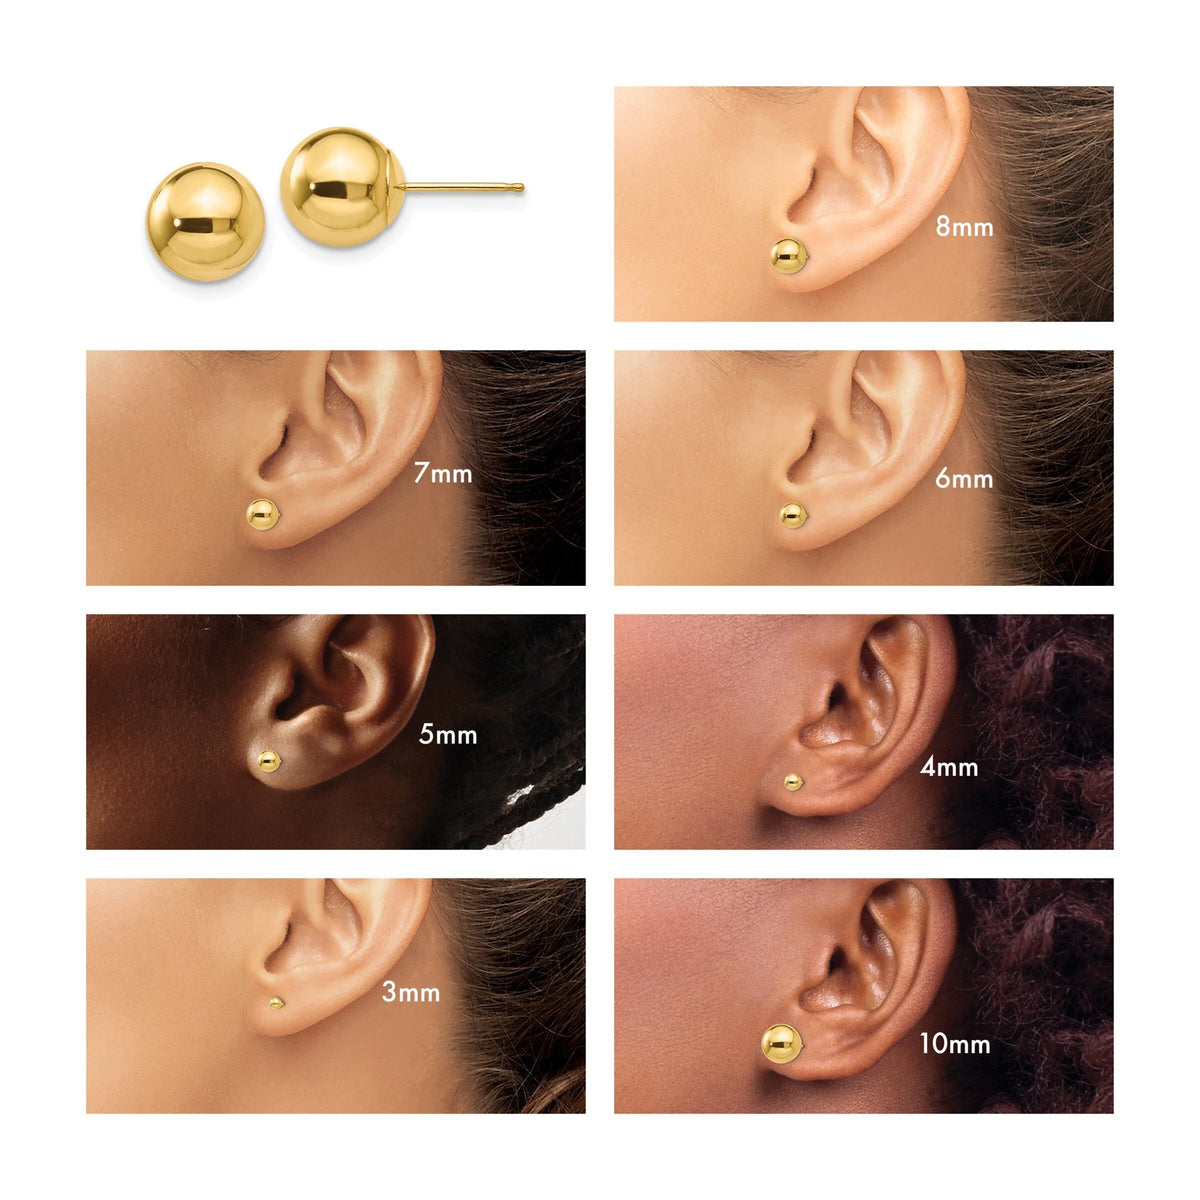 14k Yellow Gold Ball Post Earrings 3mm to 10mm Sizes Available Genuine 14k Yellow Gold (Not Plated or Filled) Made in USA Gift Box Included